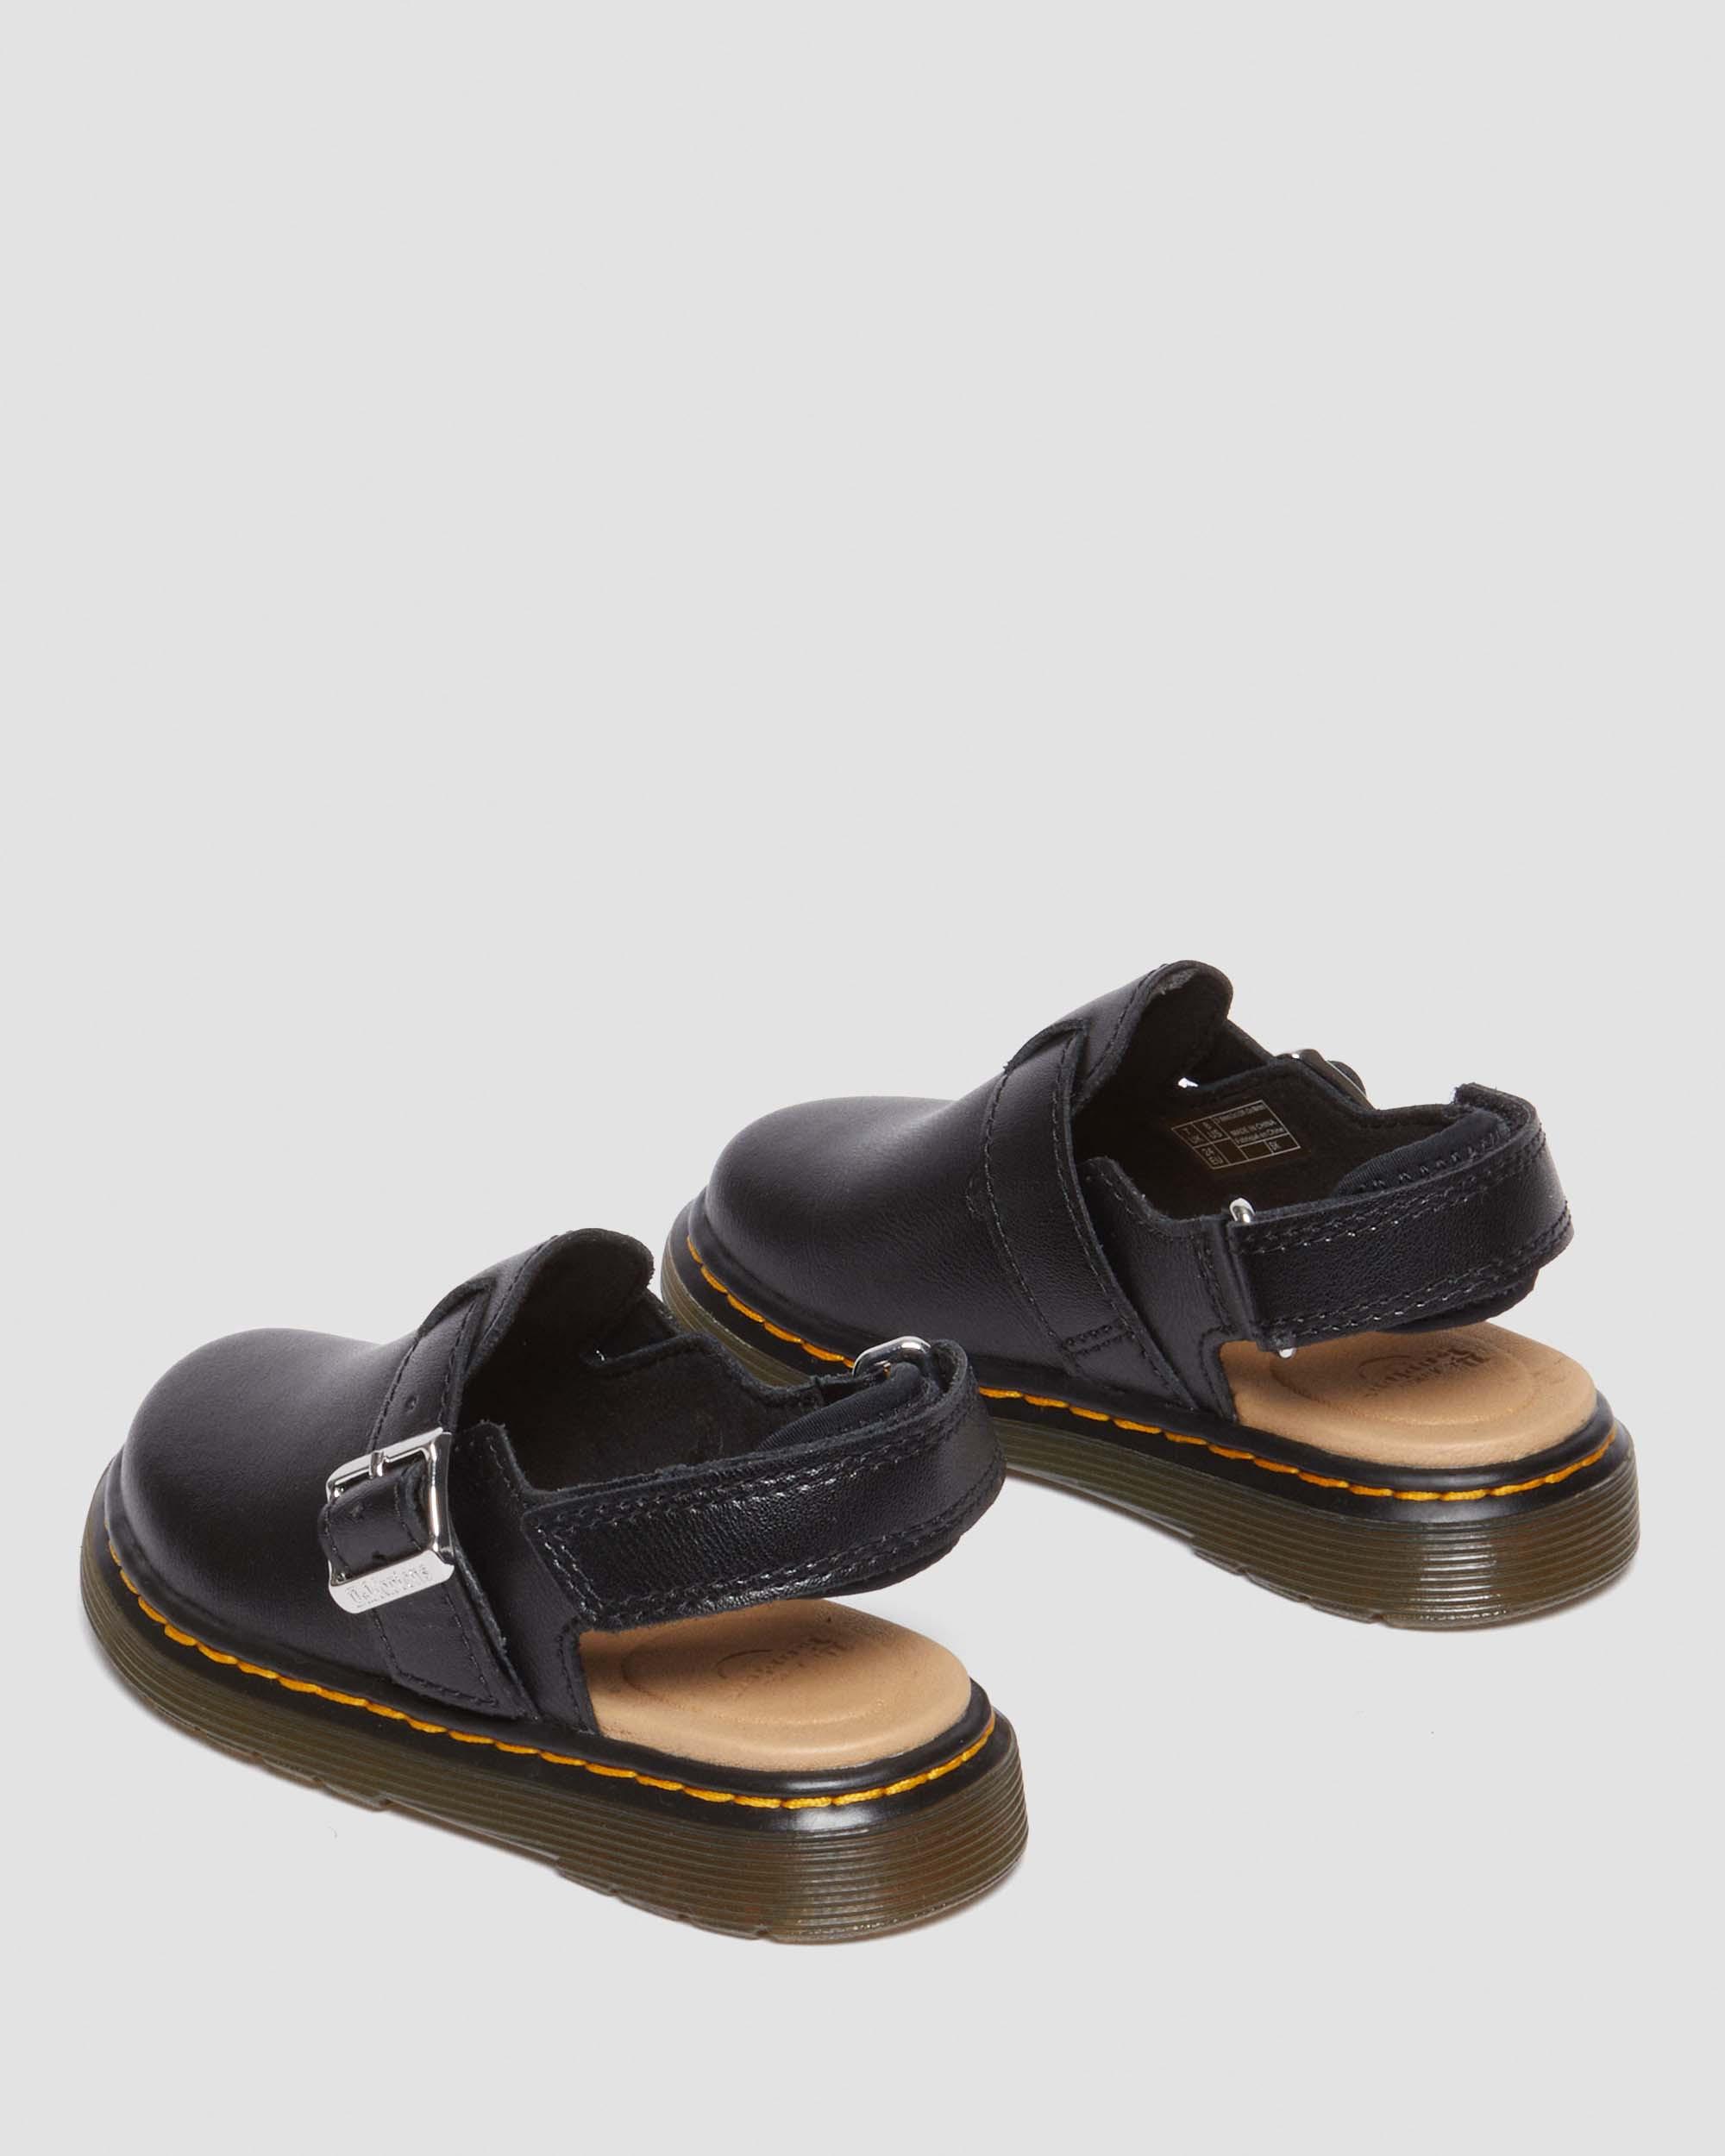 Toddler Jorgie Leather Mules in Black